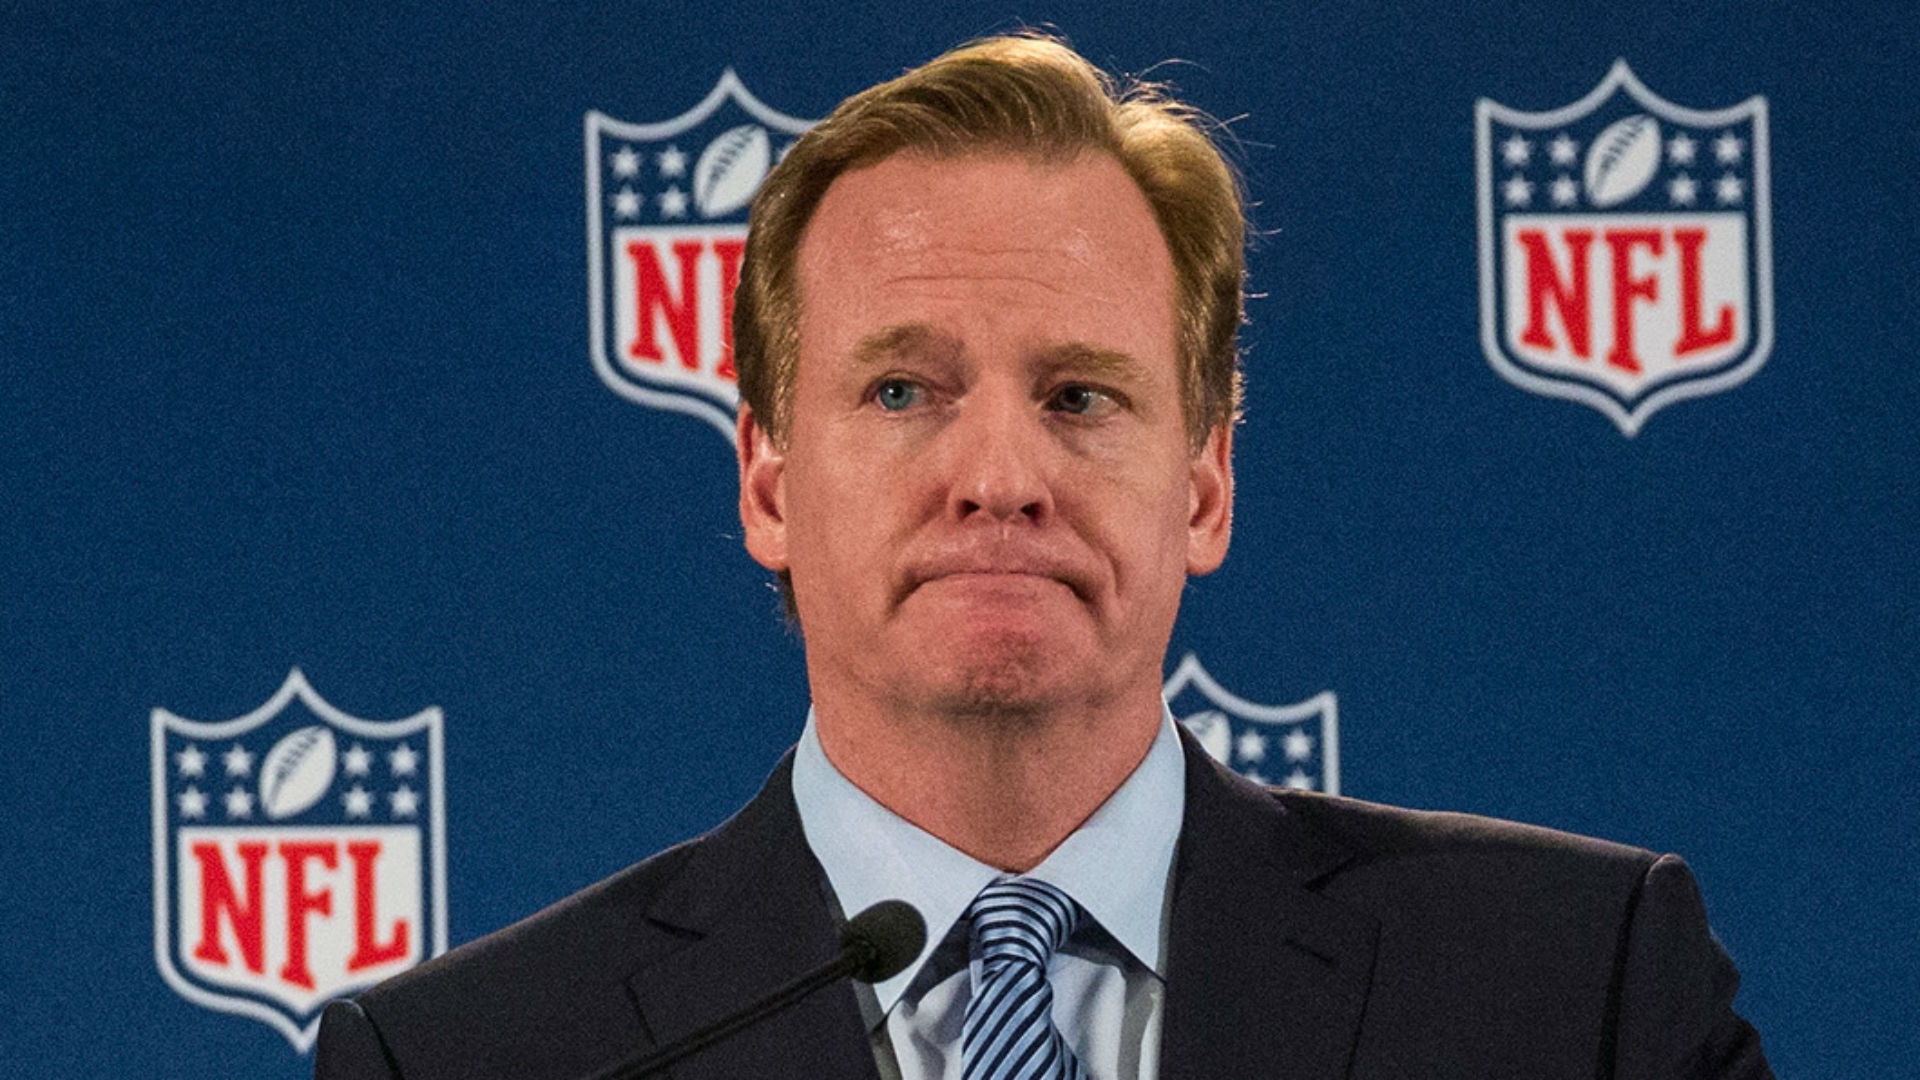 Goodell Avoids Testifying as NFL Settles Lawsuit with Children’s Charity